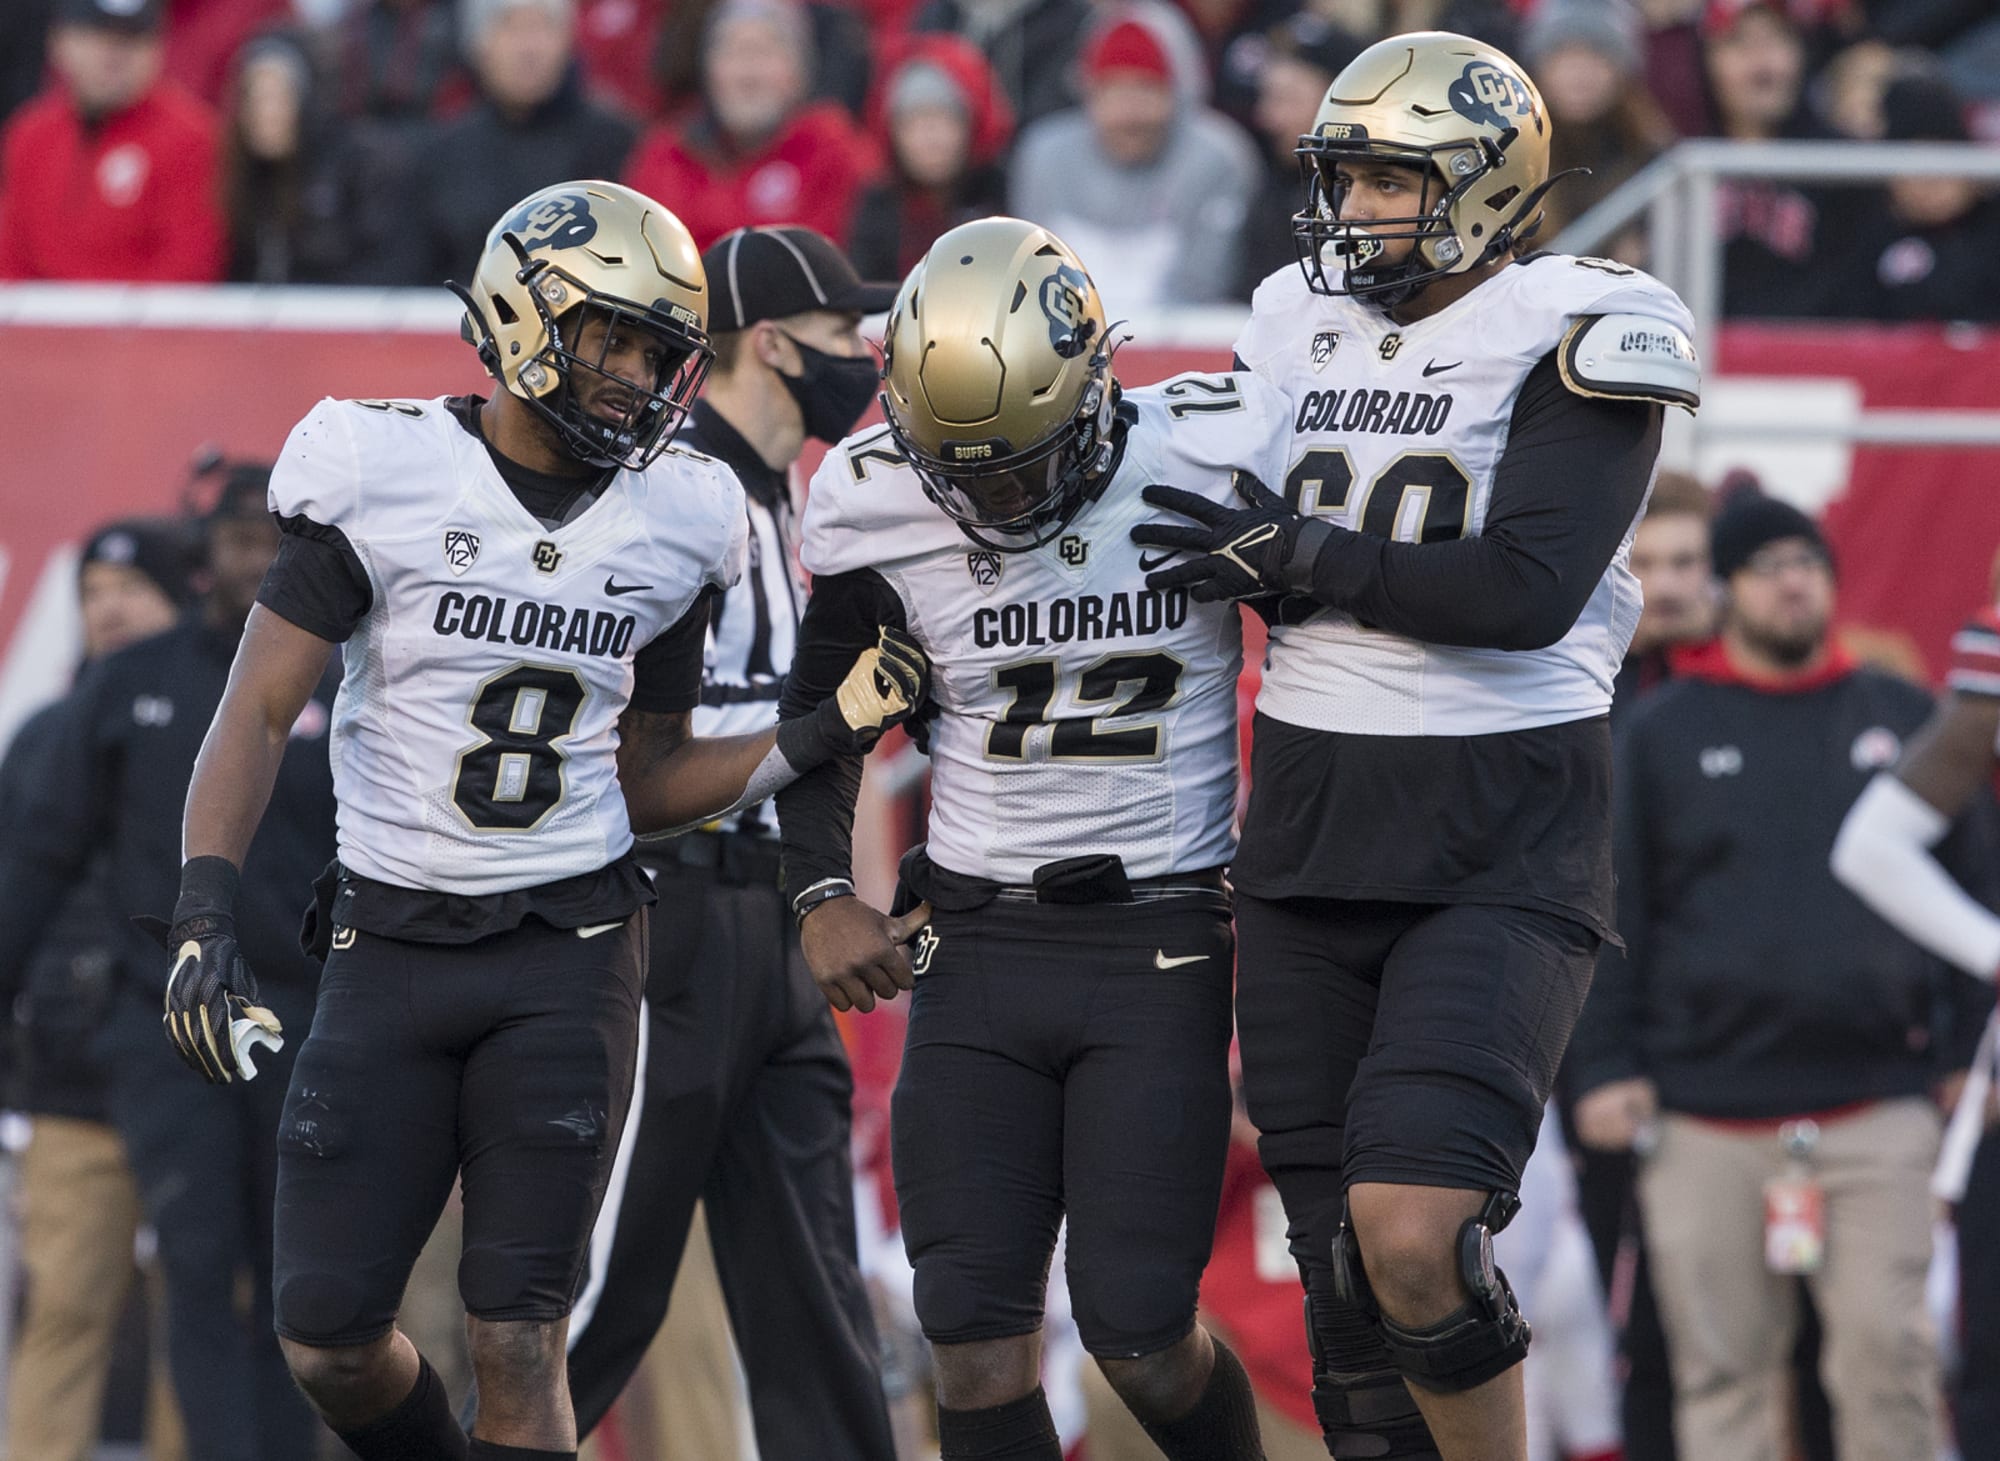 Colorado Football Pac12 announces change in Championship game